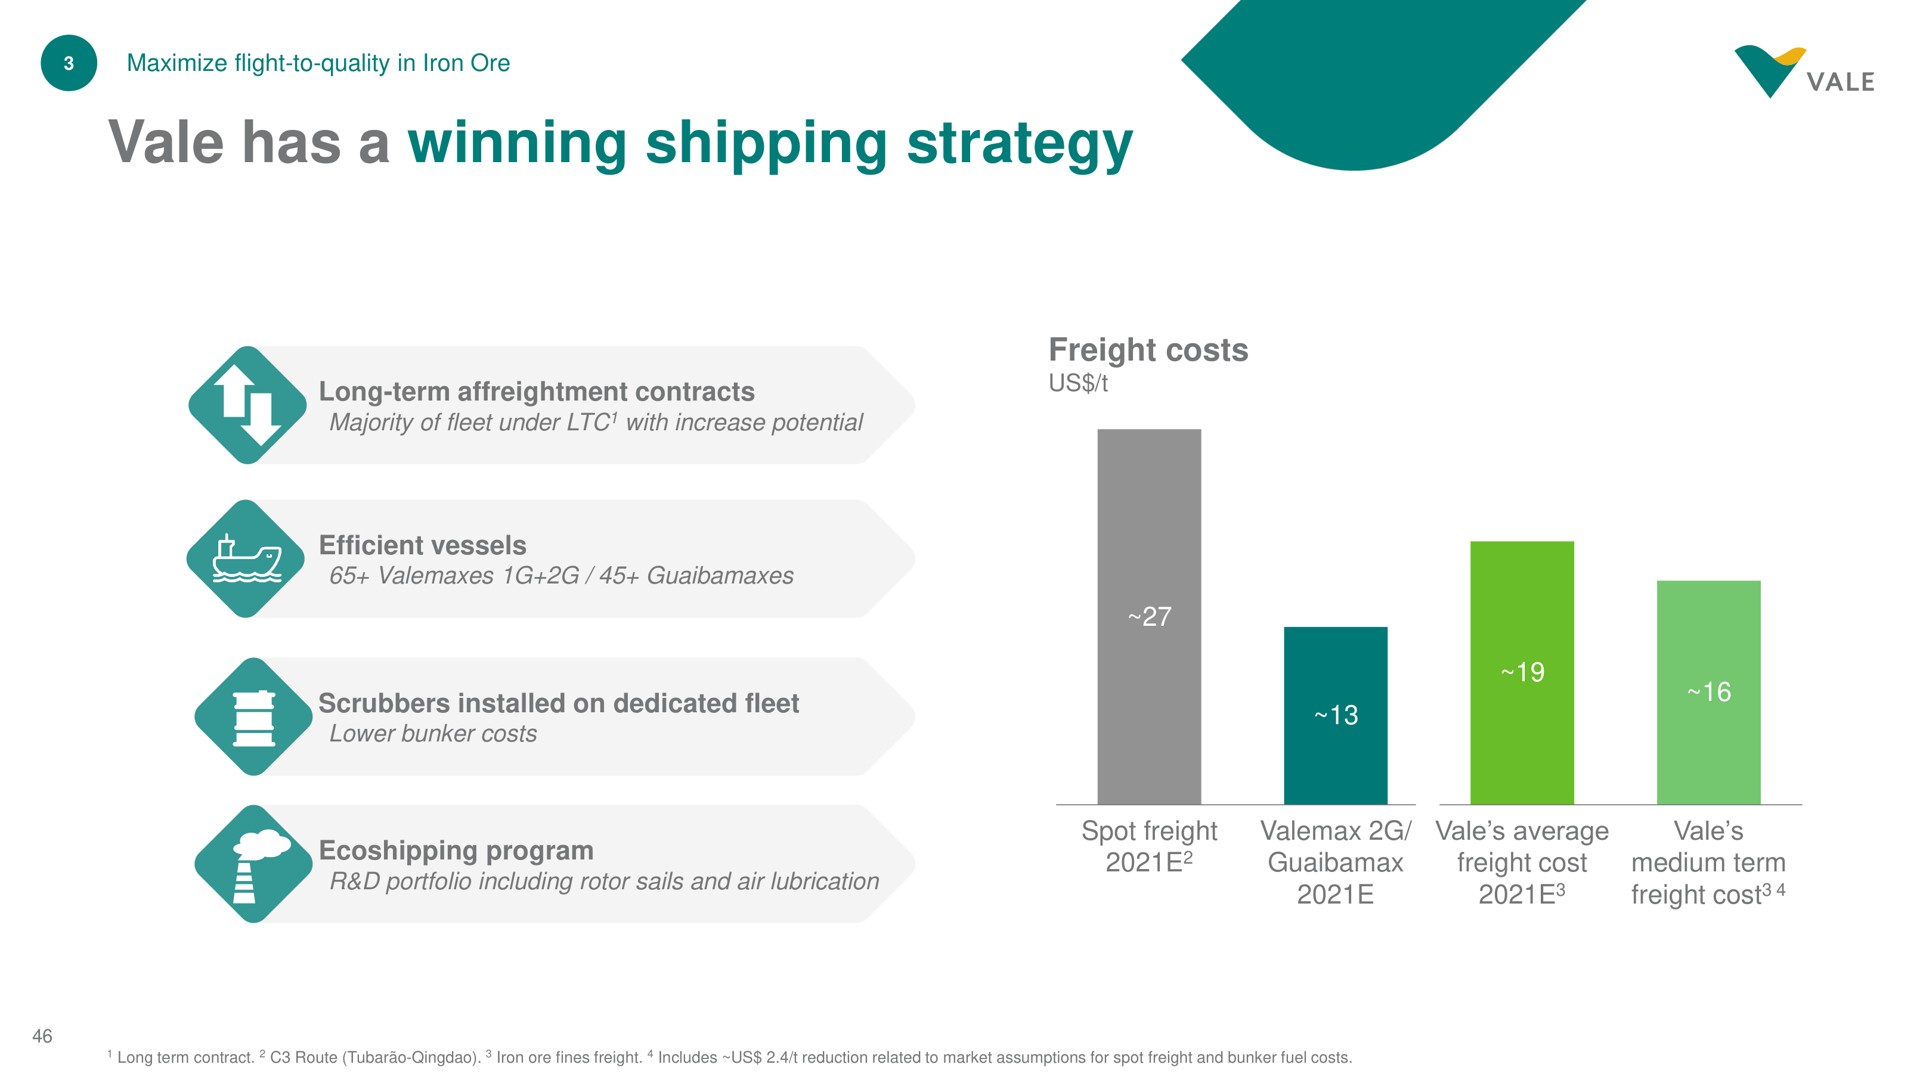 vale has a winning shipping strategy | Vale